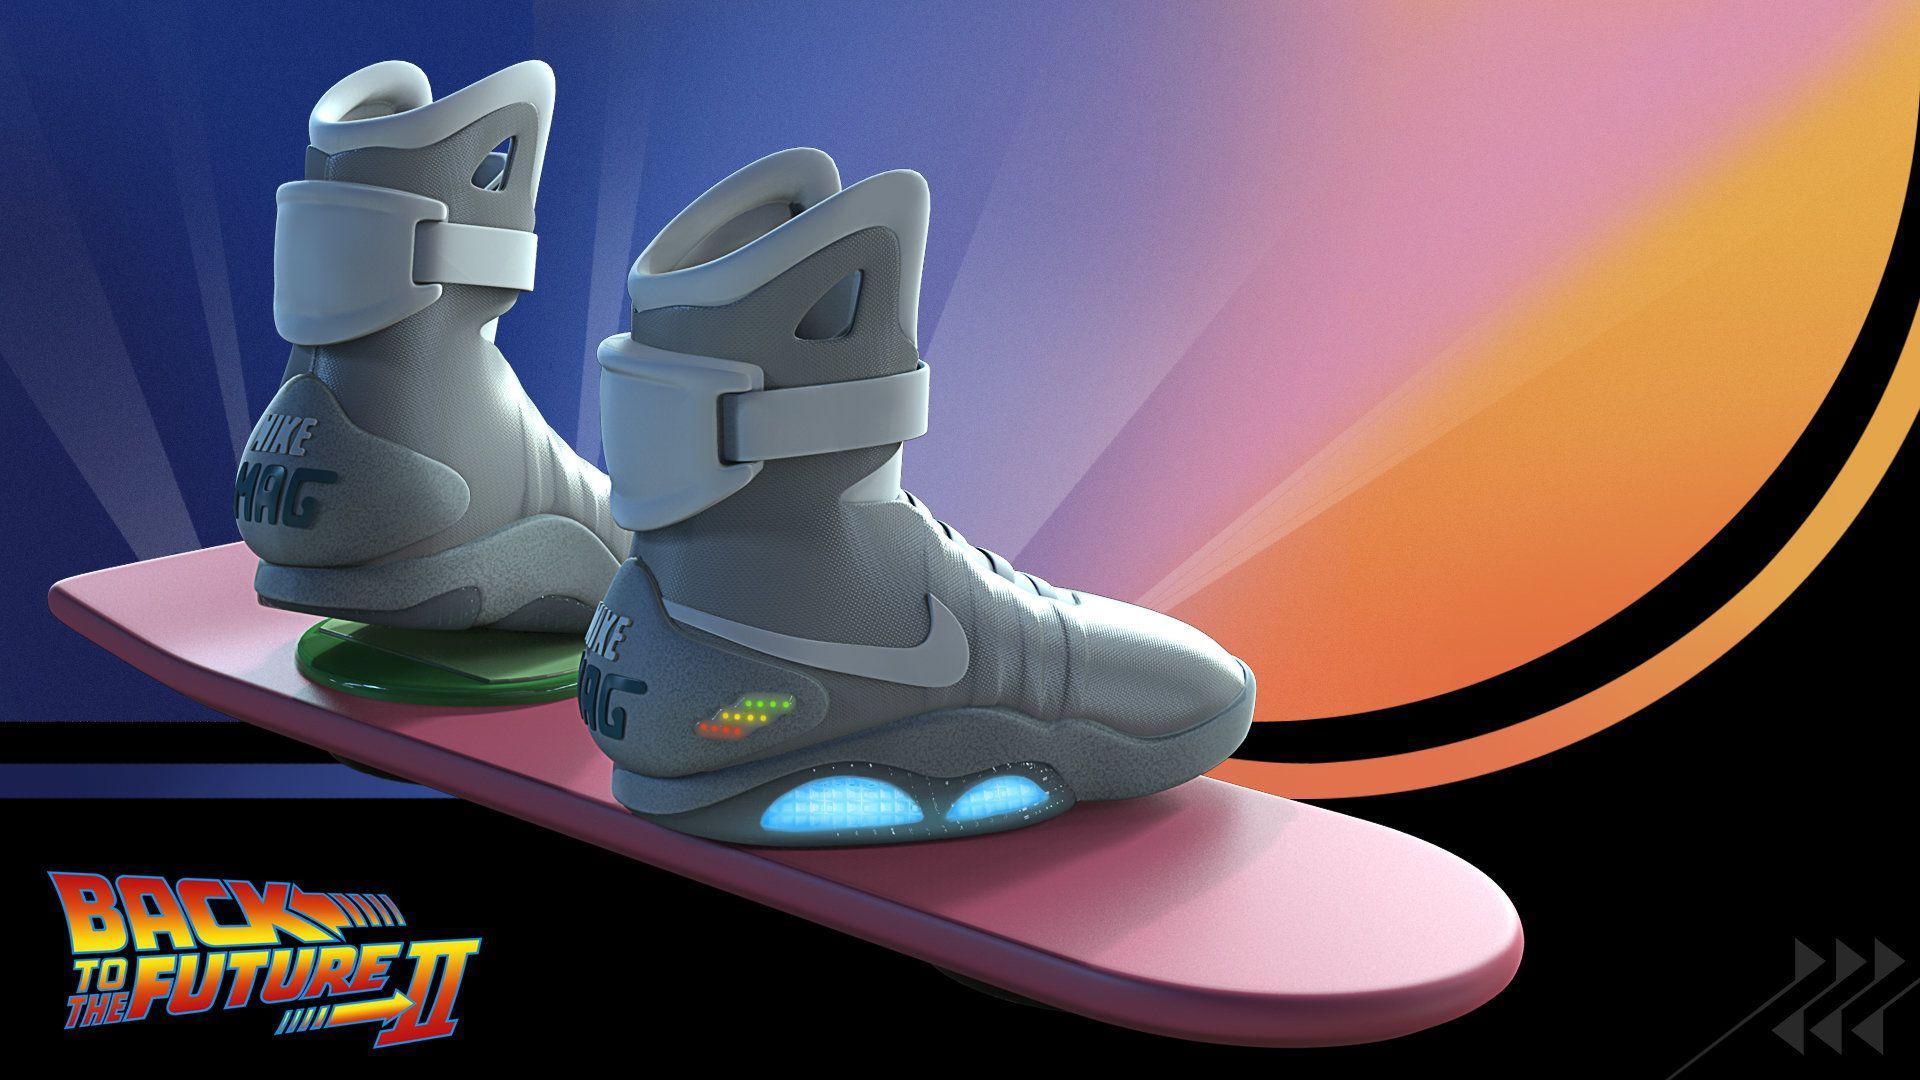 Nike Air Mag Wallpapers - Top Free Air Mag Backgrounds - WallpaperAccess